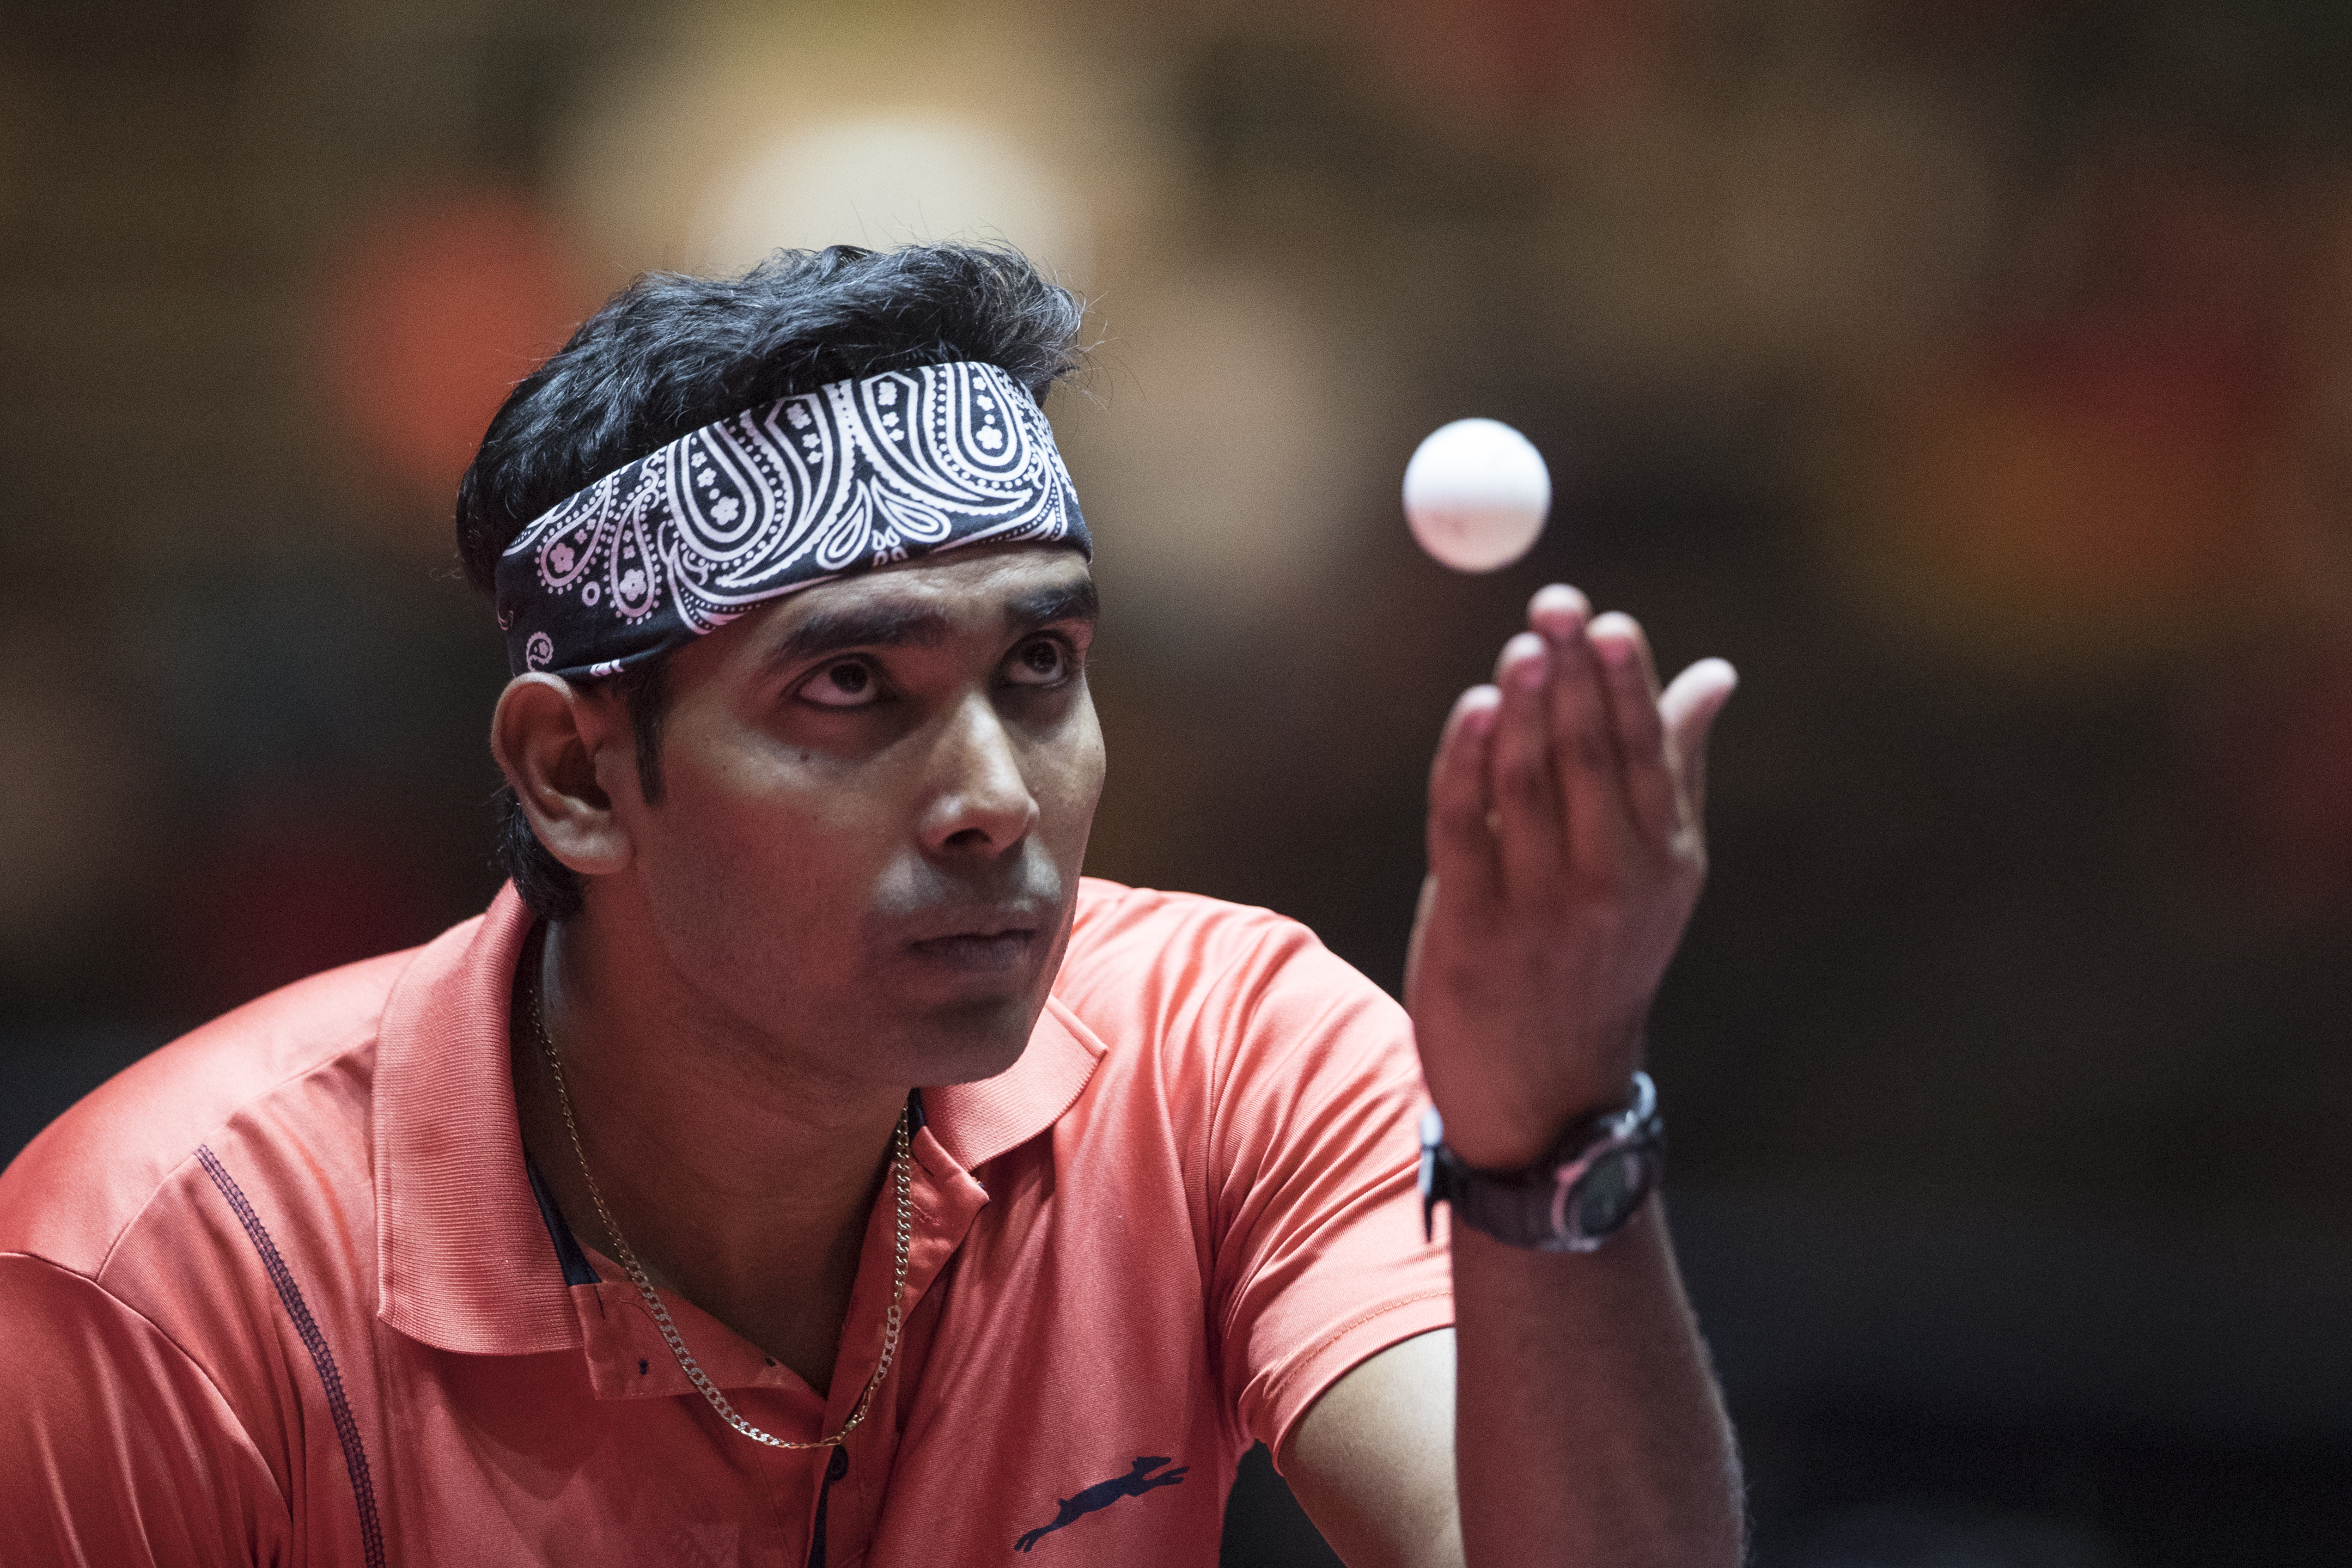 Sharath Kamal takes a solid stand in Manika Batra-TTFI controversy